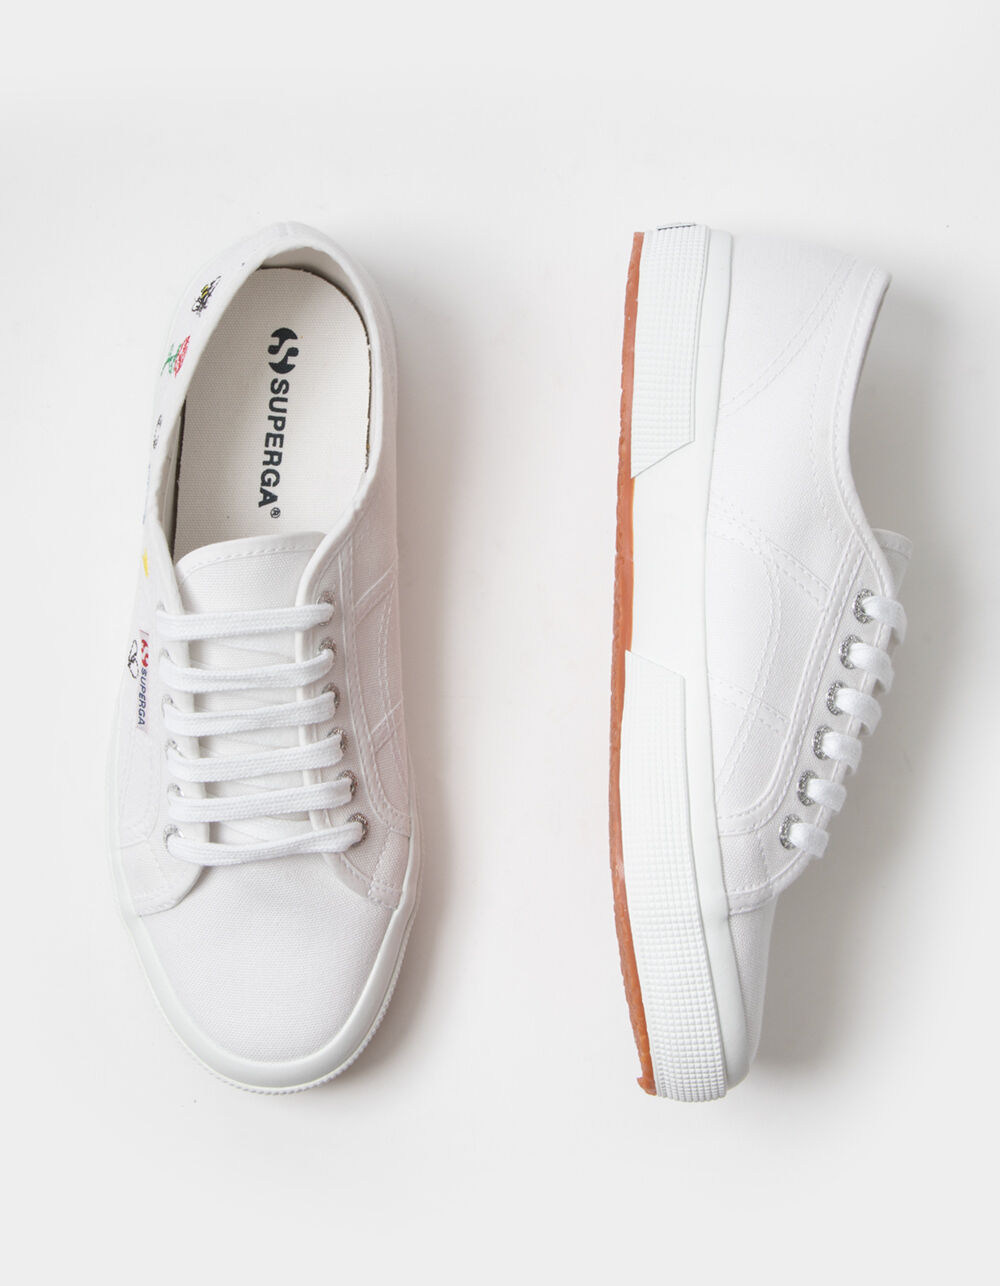 SUPERGA 2750-EMBCOTW Womens Sneakers - WHITE COMBO | Tillys